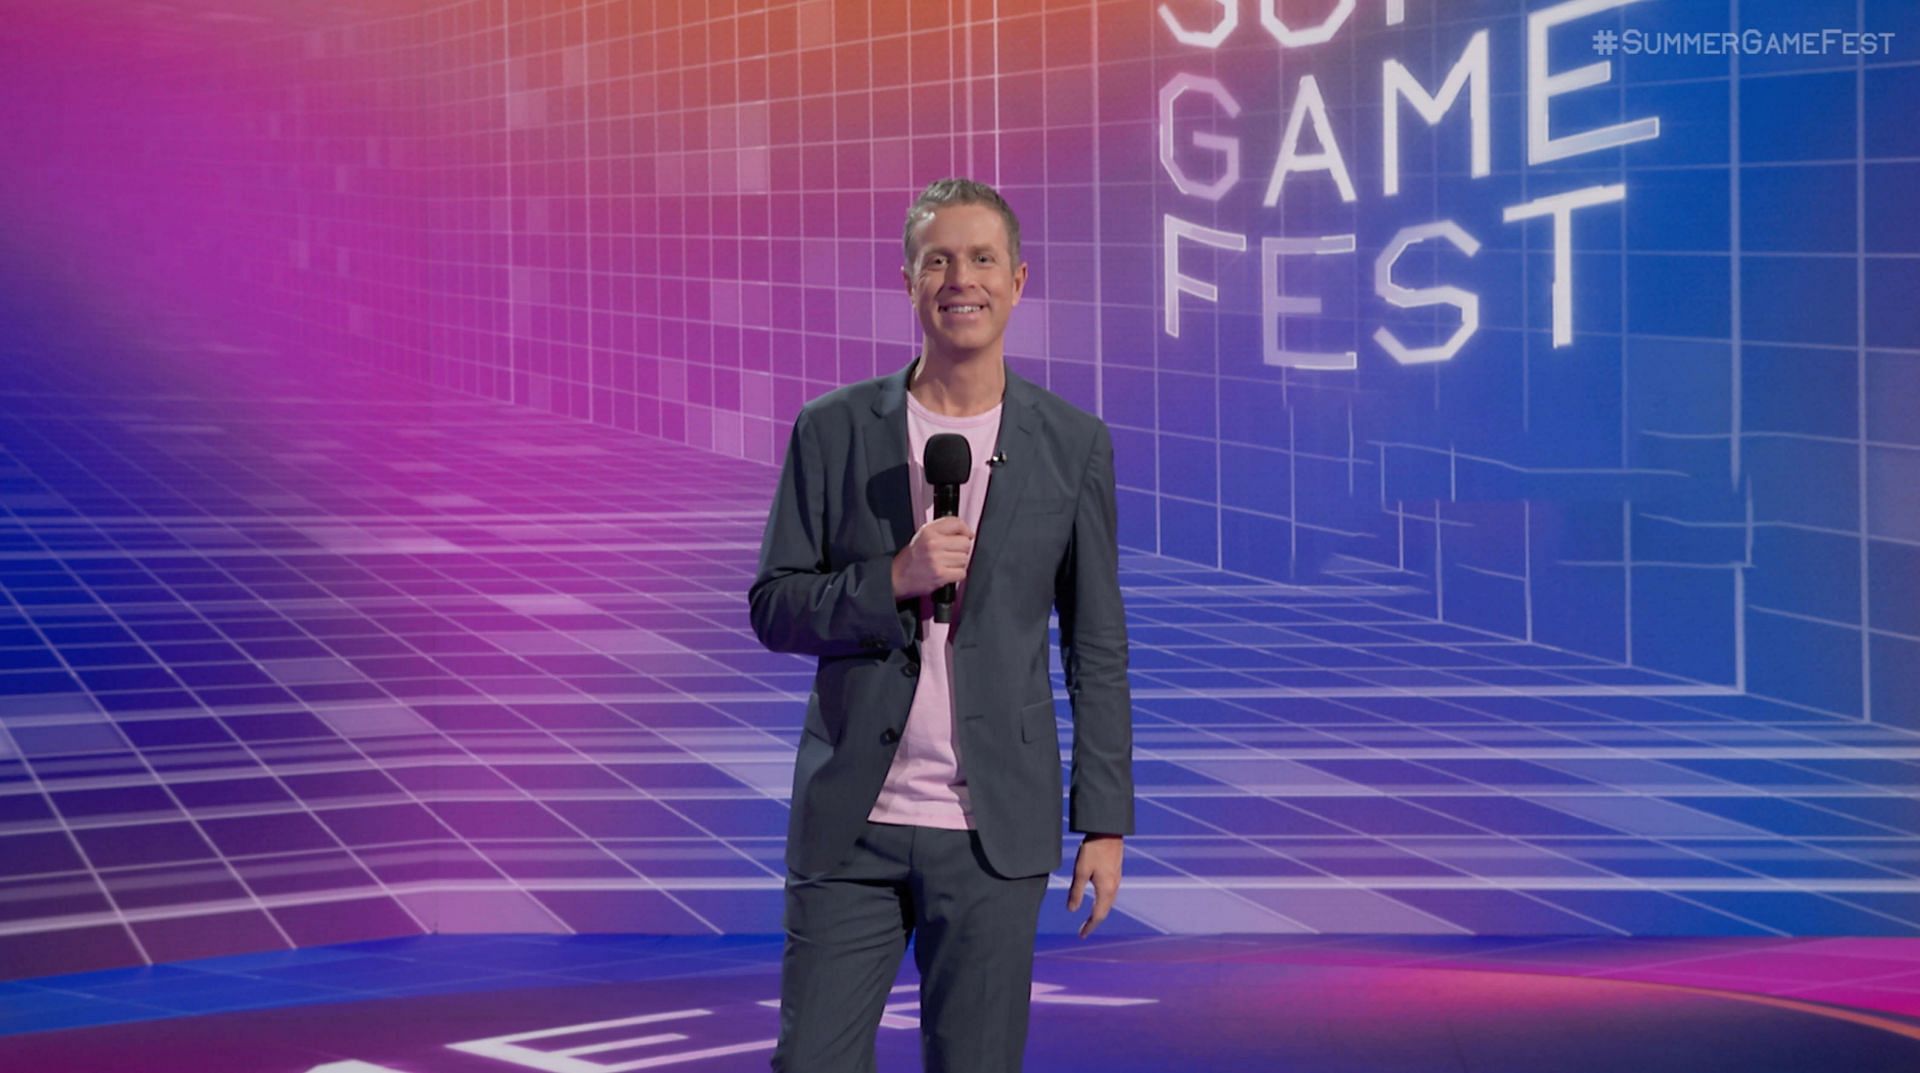 The iconic host will handle the reveals of many new games (Image via Summer Game Fest)